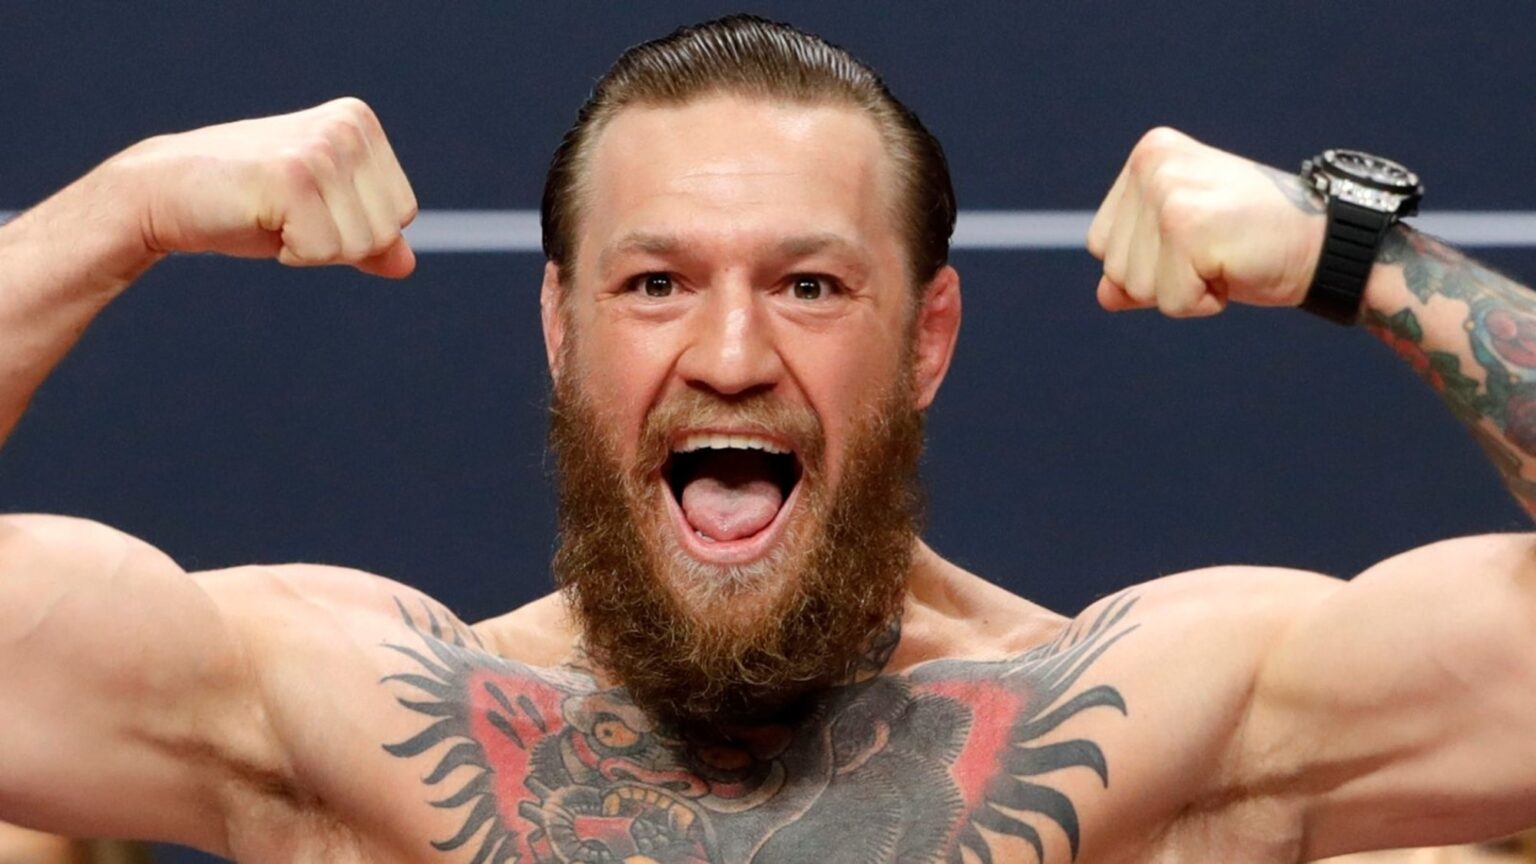 Irish UFC fighter Conor McGregor has officially come out of retirement. When is McGregor's next fight?